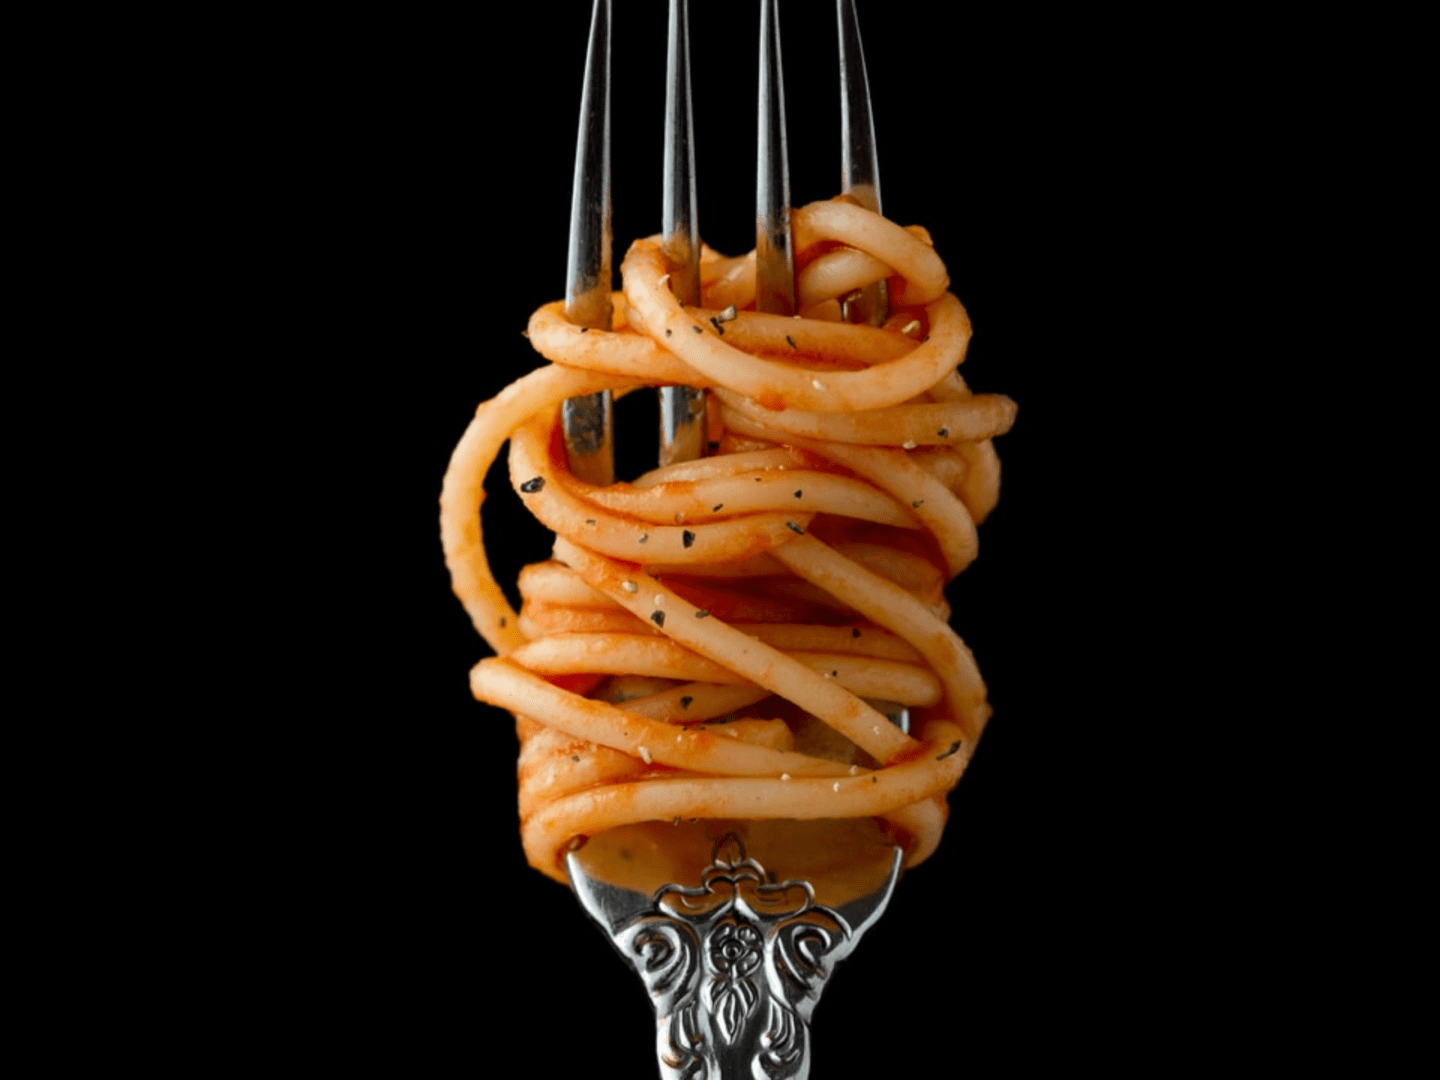 A fork with some pasta on it